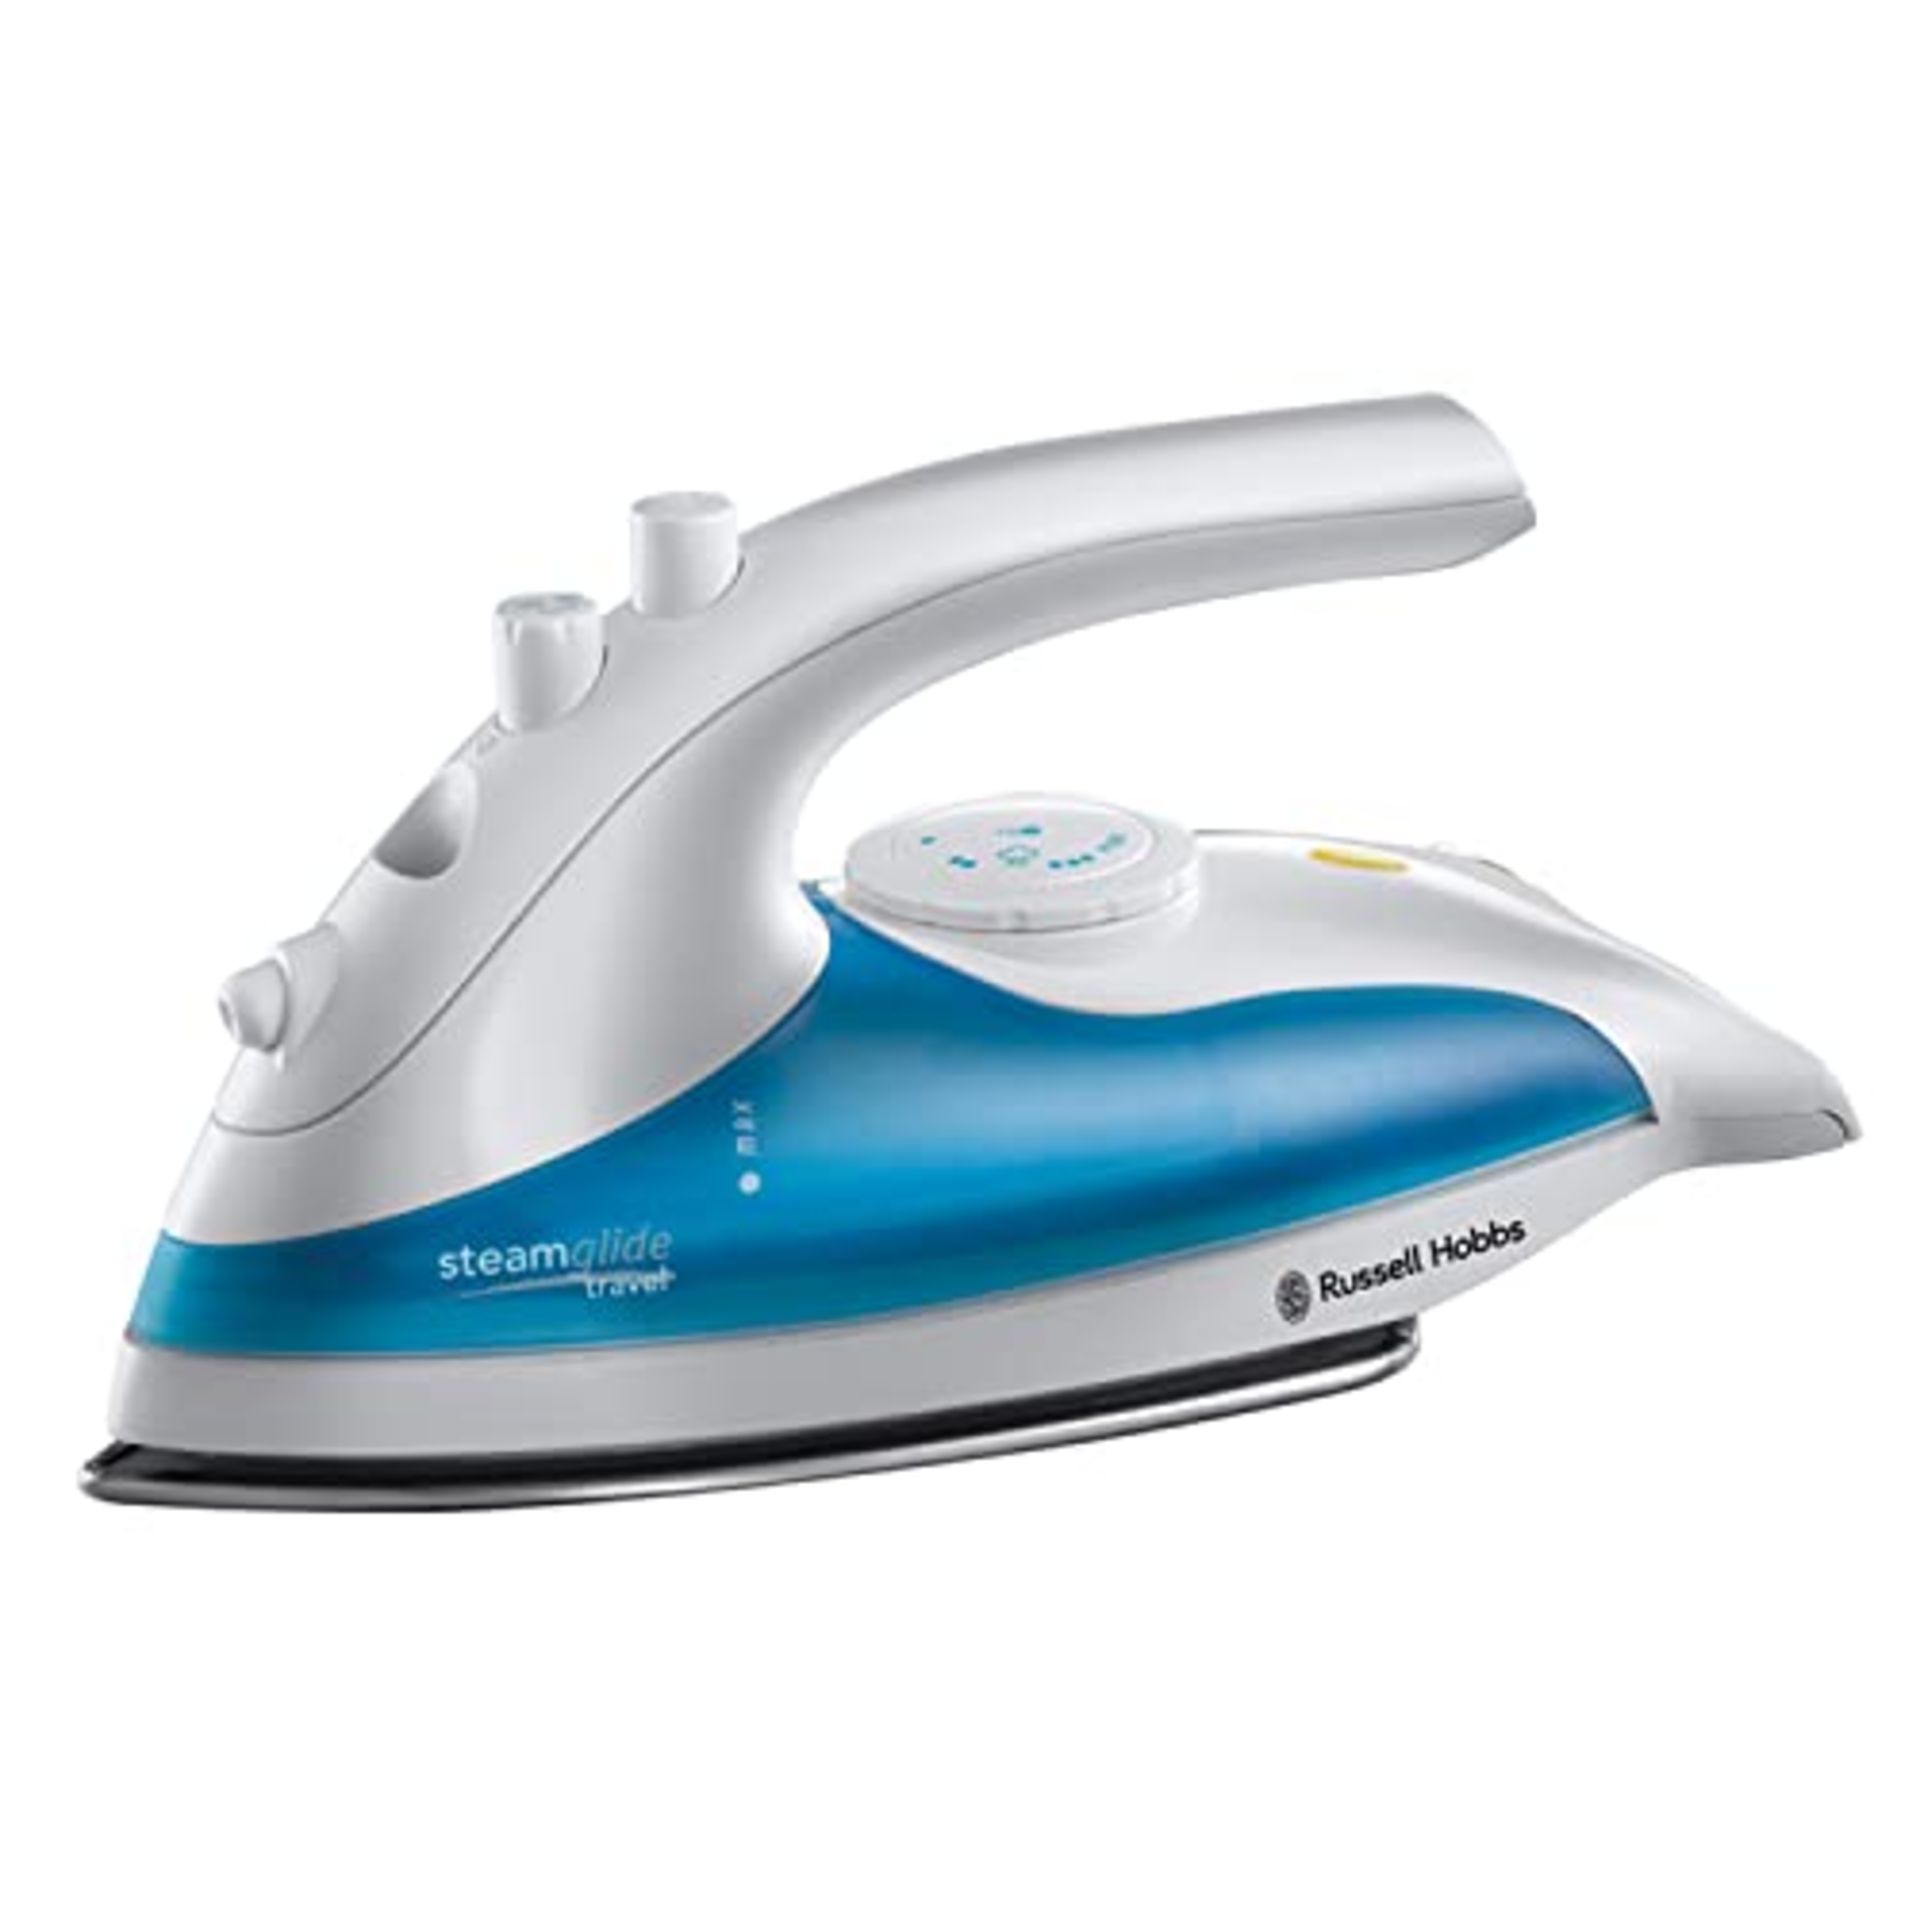 Russell Hobbs Dual Voltage Steam Glide Travel Iron, 80ml Water Tank, Stainless Steel S